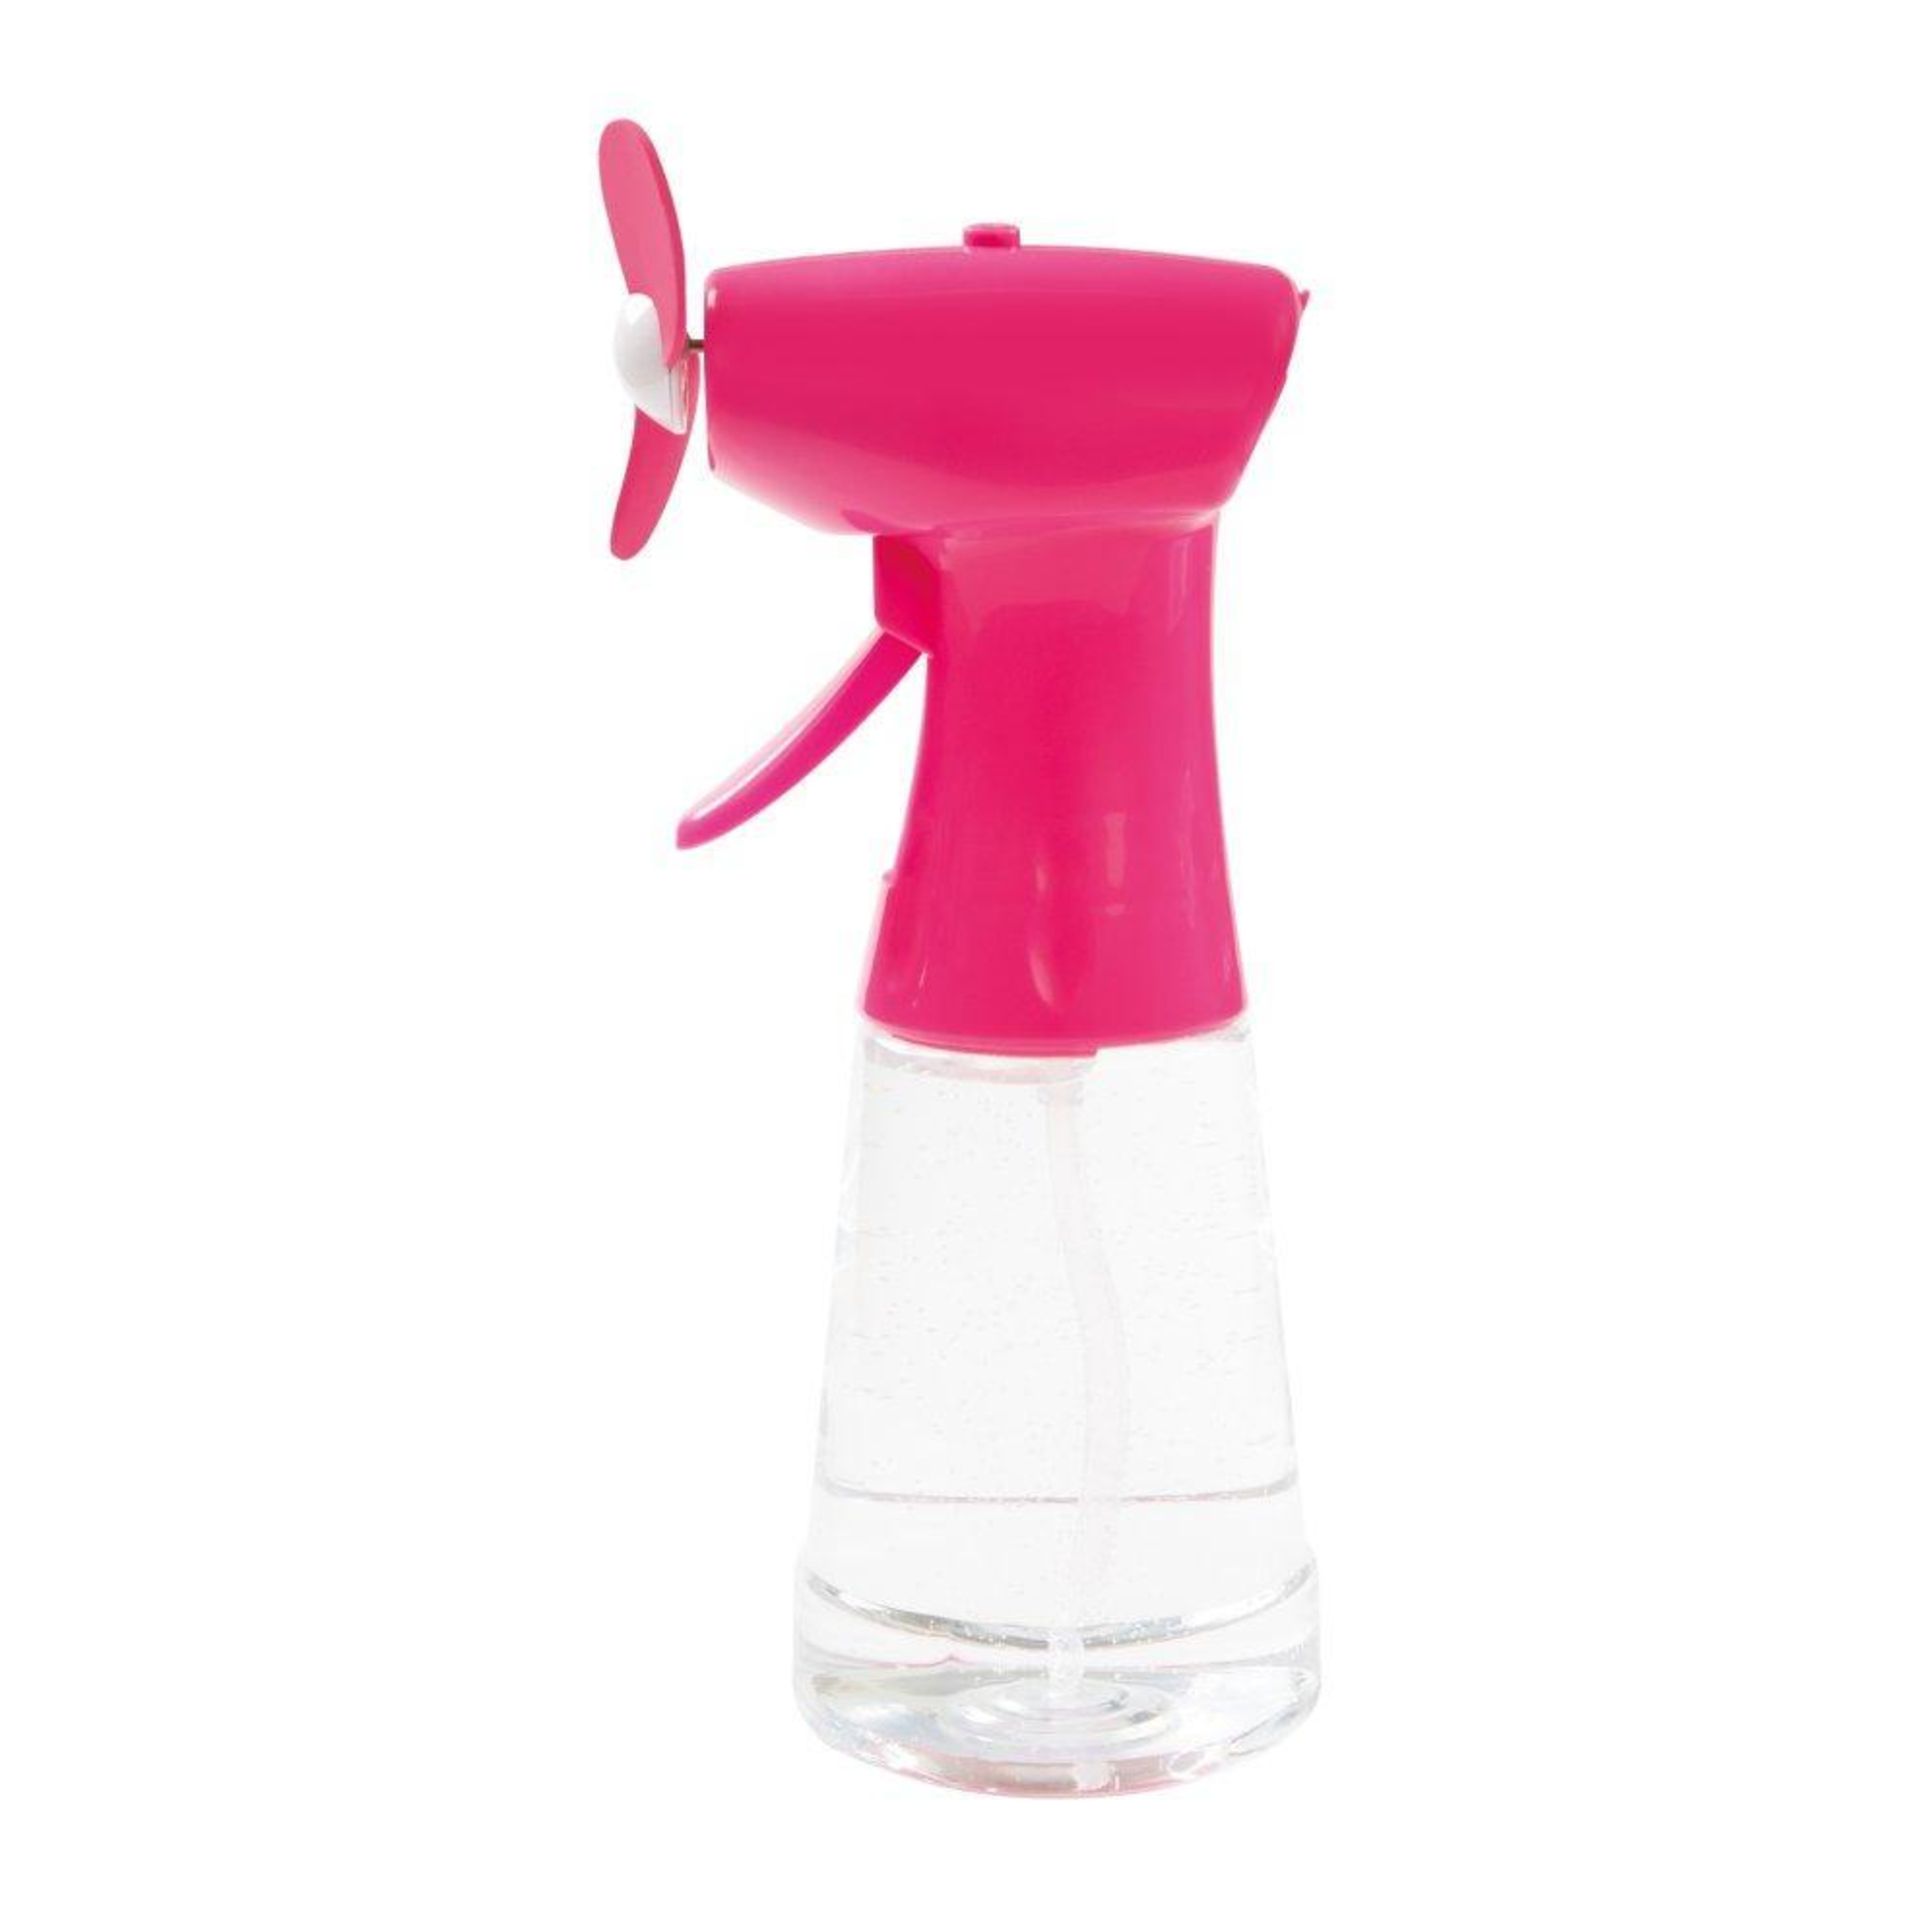 Benross Water Mist Spray Fan Pink - AO. Stay cool during hot summer days with the Benross Water Mist - Image 2 of 2